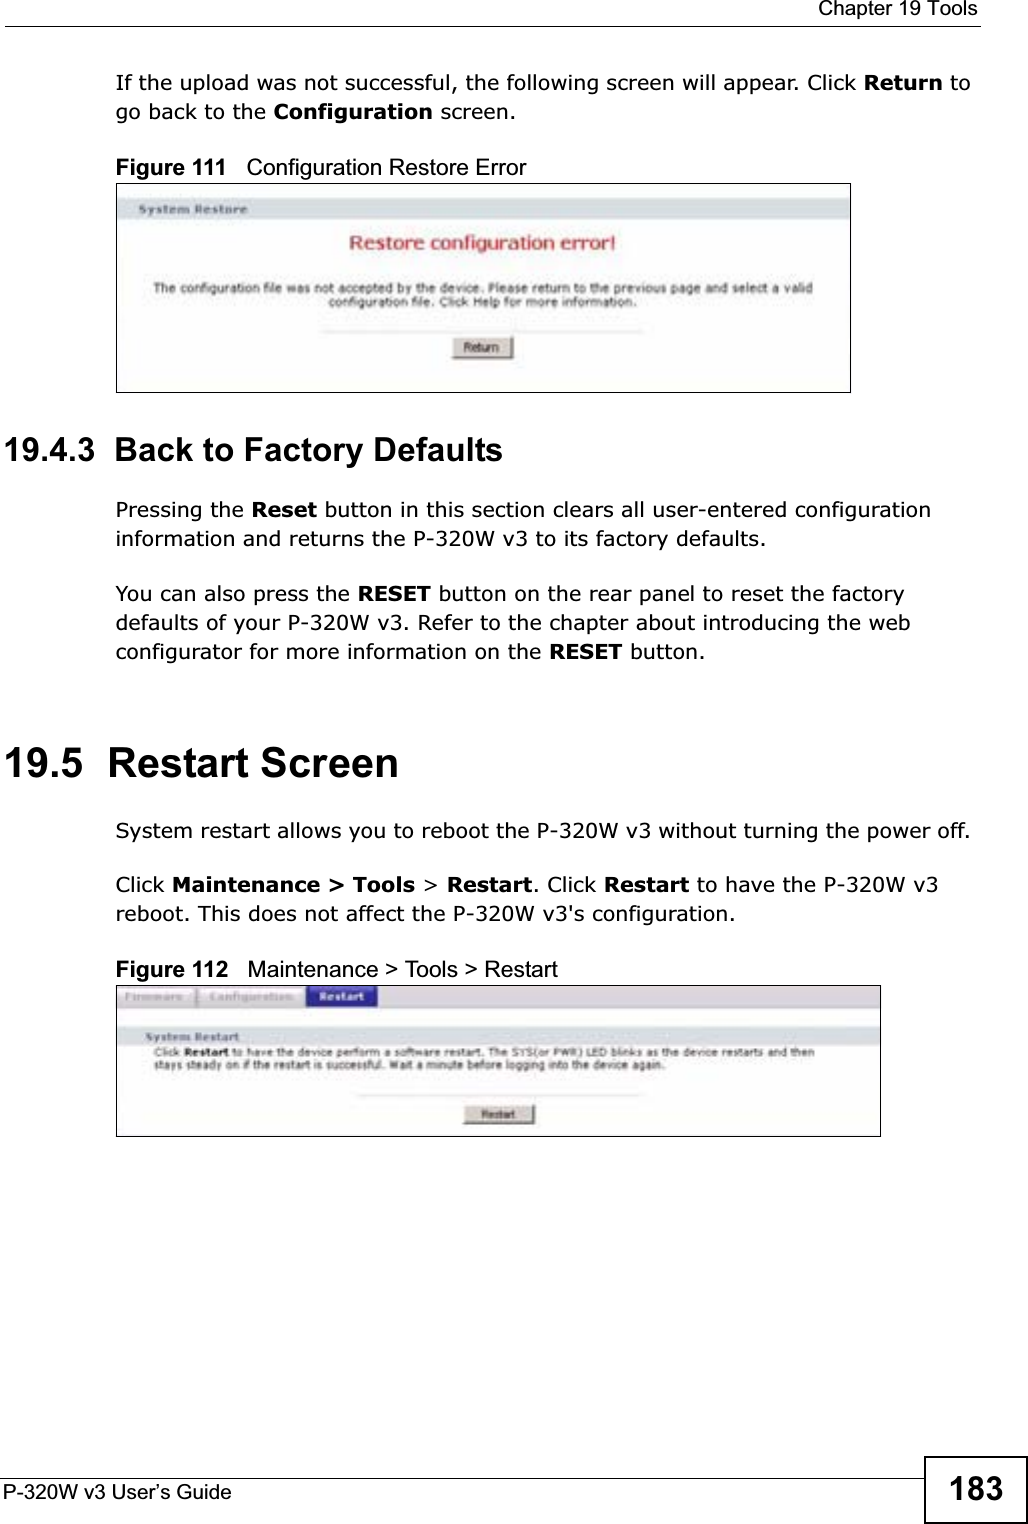  Chapter 19 ToolsP-320W v3 User’s Guide 183If the upload was not successful, the following screen will appear. Click Return to go back to the Configuration screen.Figure 111   Configuration Restore Error19.4.3  Back to Factory DefaultsPressing the Reset button in this section clears all user-entered configuration information and returns the P-320W v3 to its factory defaults.You can also press the RESET button on the rear panel to reset the factory defaults of your P-320W v3. Refer to the chapter about introducing the web configurator for more information on the RESET button.19.5  Restart ScreenSystem restart allows you to reboot the P-320W v3 without turning the power off. Click Maintenance &gt; Tools &gt; Restart. Click Restart to have the P-320W v3 reboot. This does not affect the P-320W v3&apos;s configuration.Figure 112   Maintenance &gt; Tools &gt; Restart 